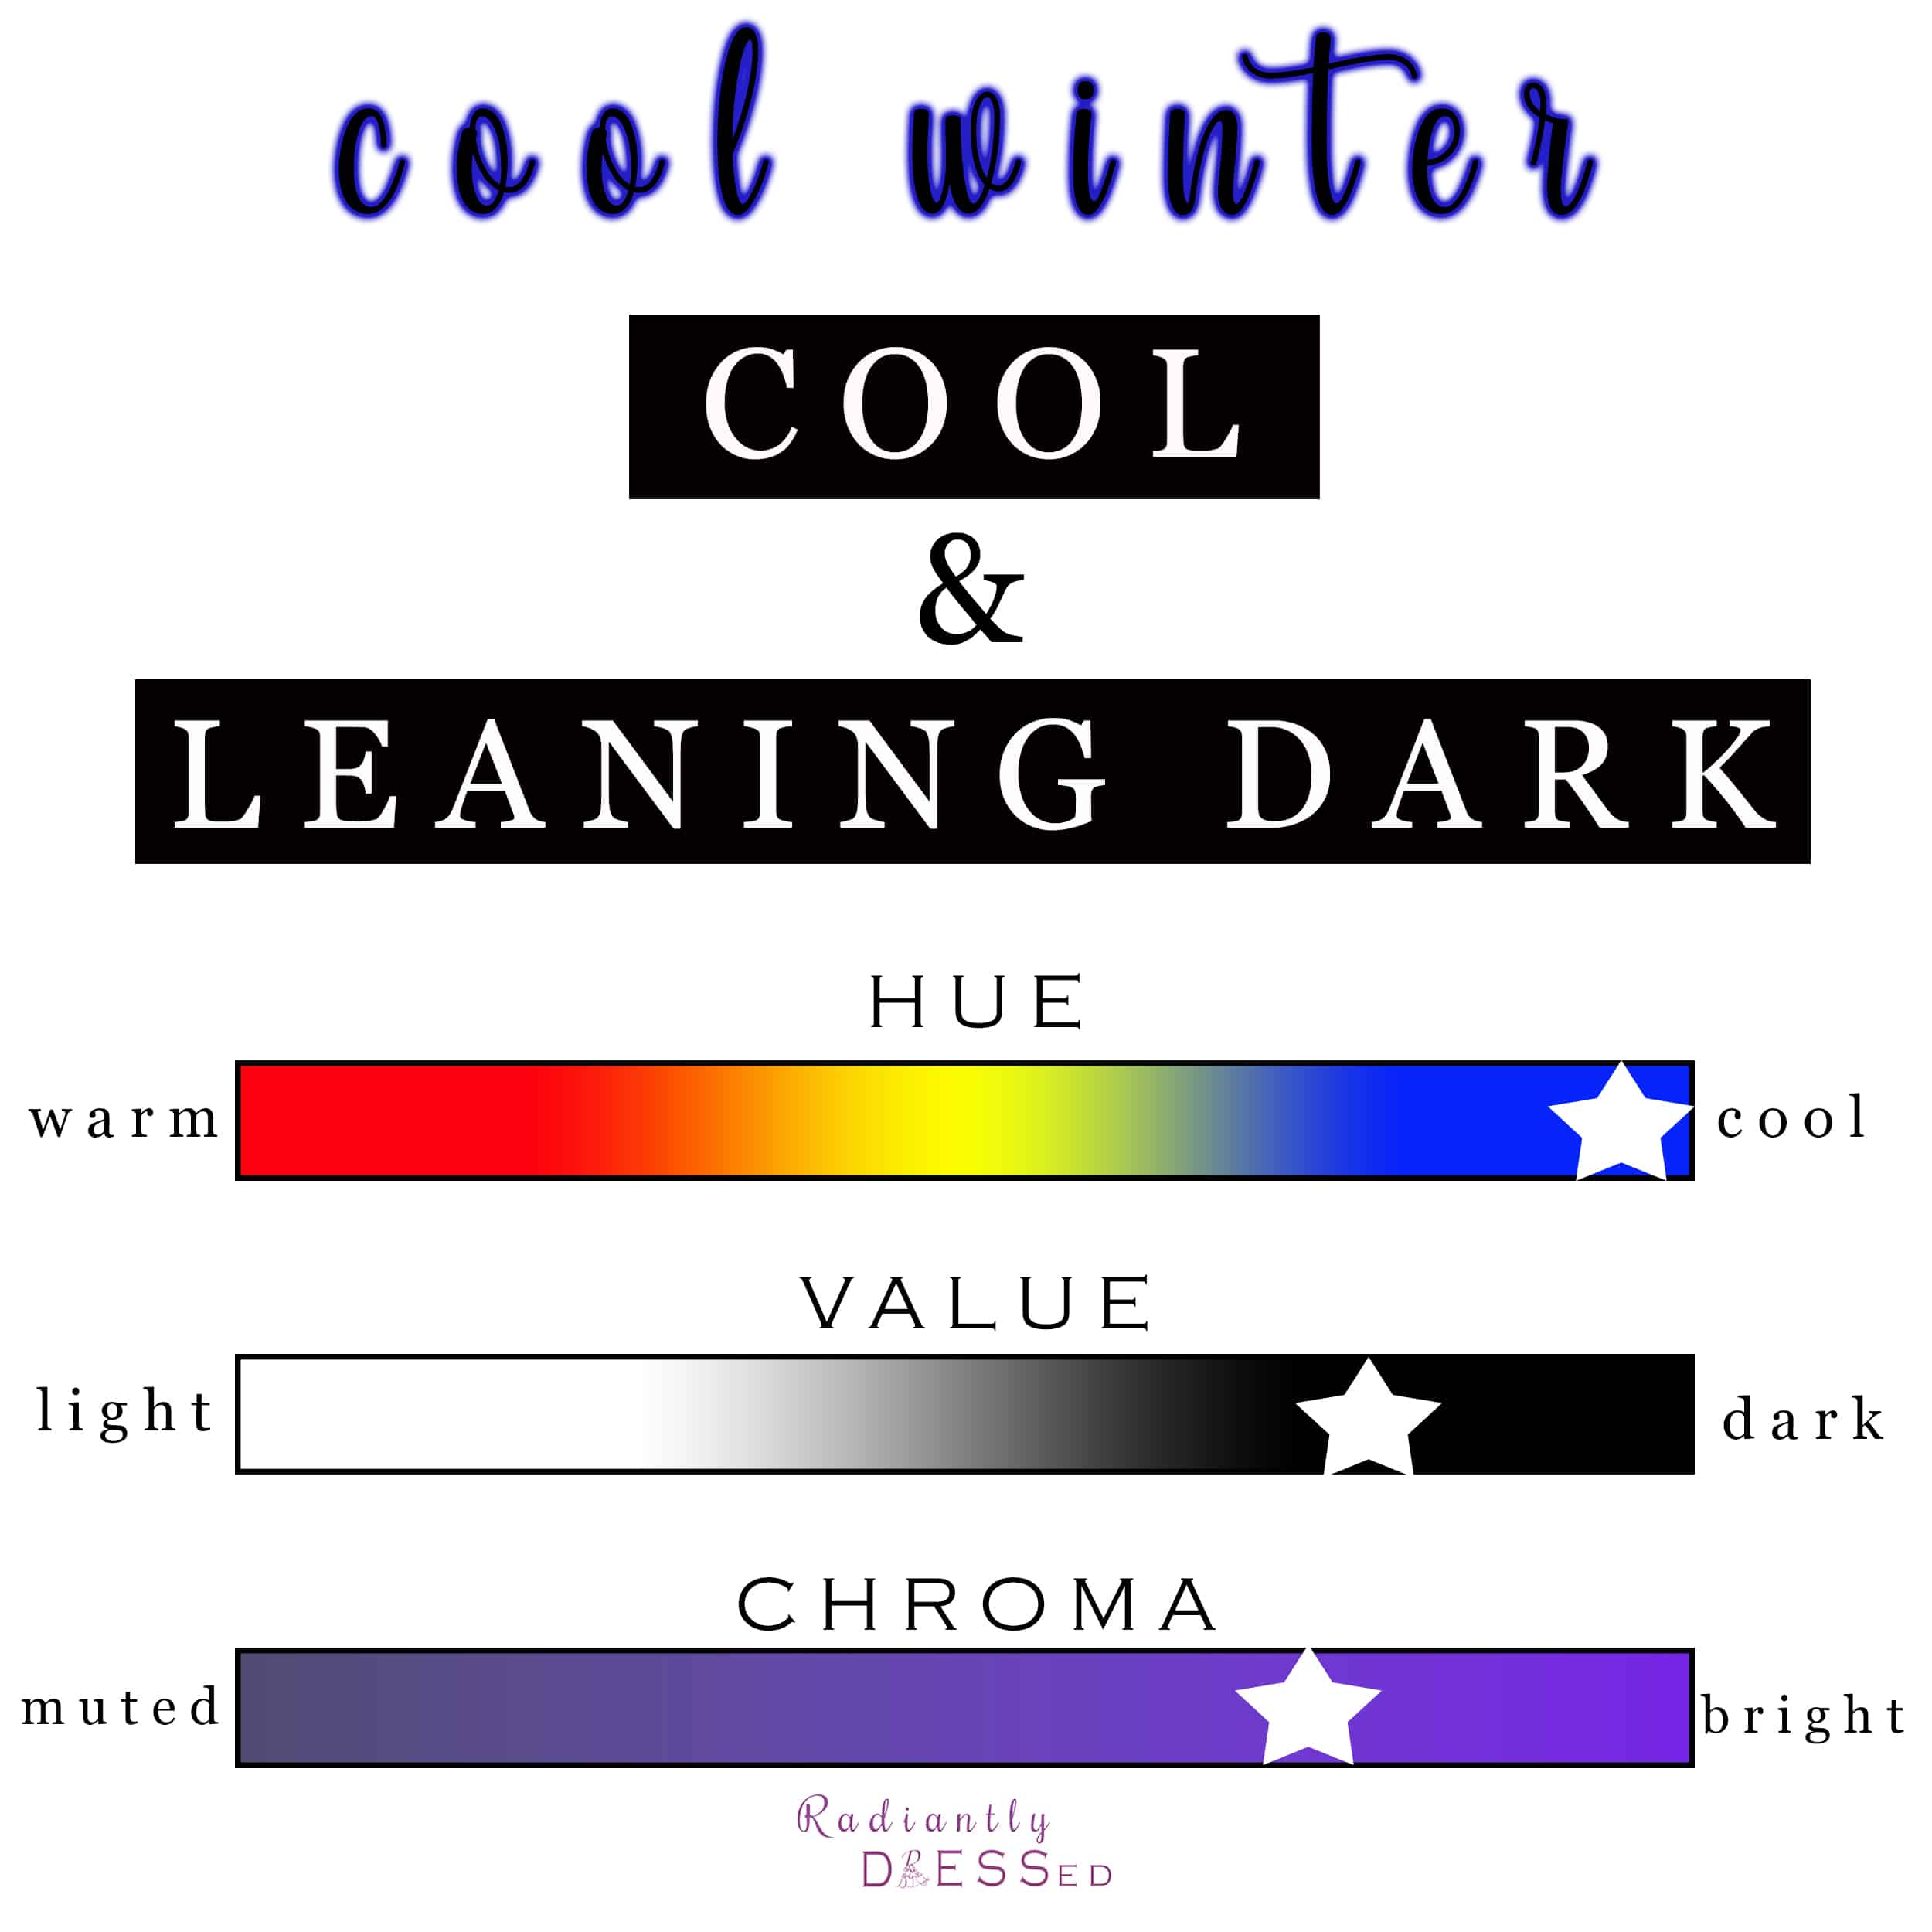 Cool winter is cool, leaning dark.